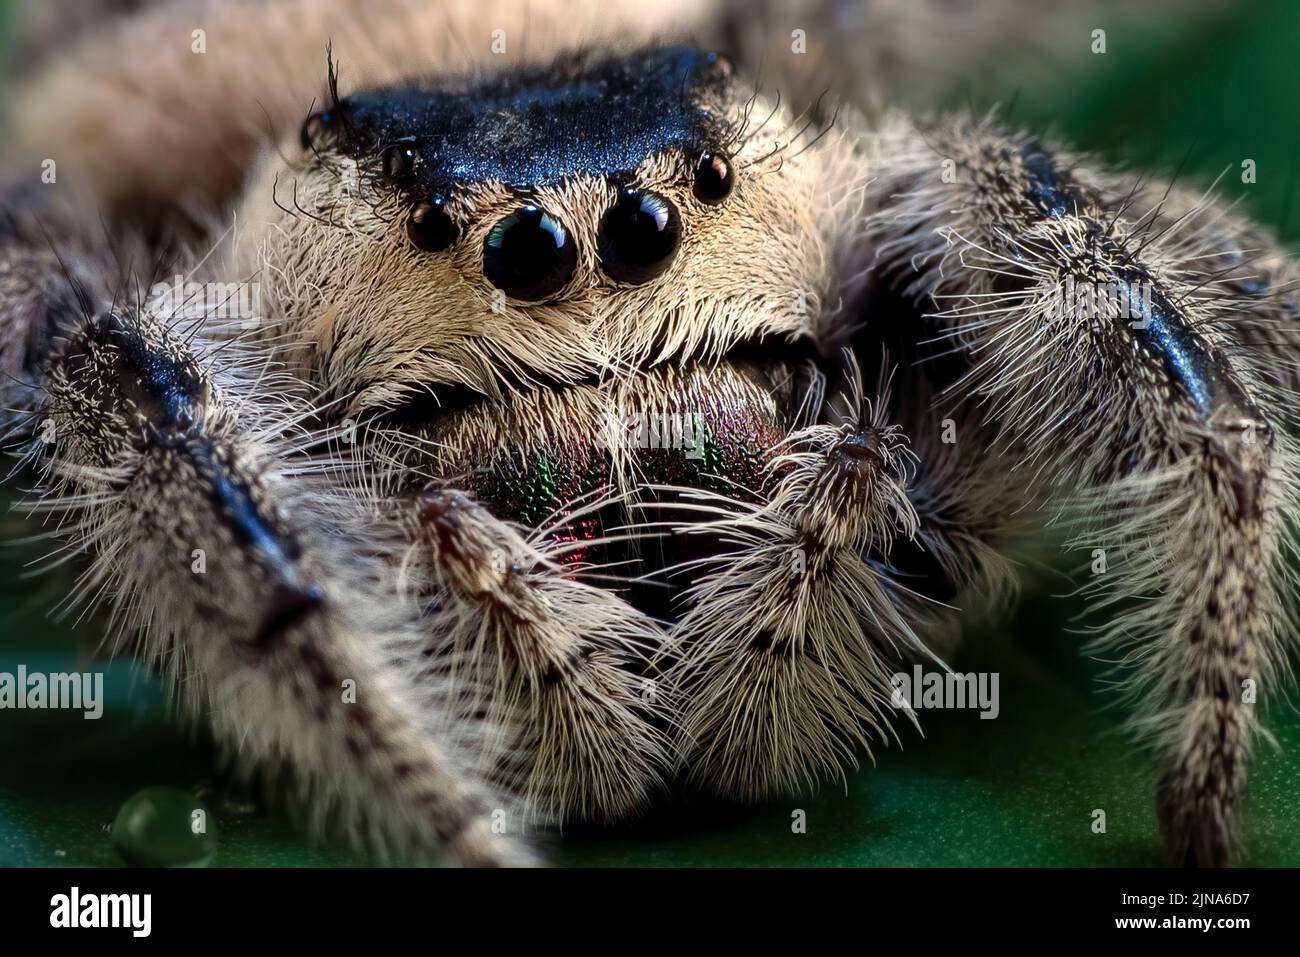 Close-Up of a tiger jumping spider on a rock, Indonesia Stock Photo